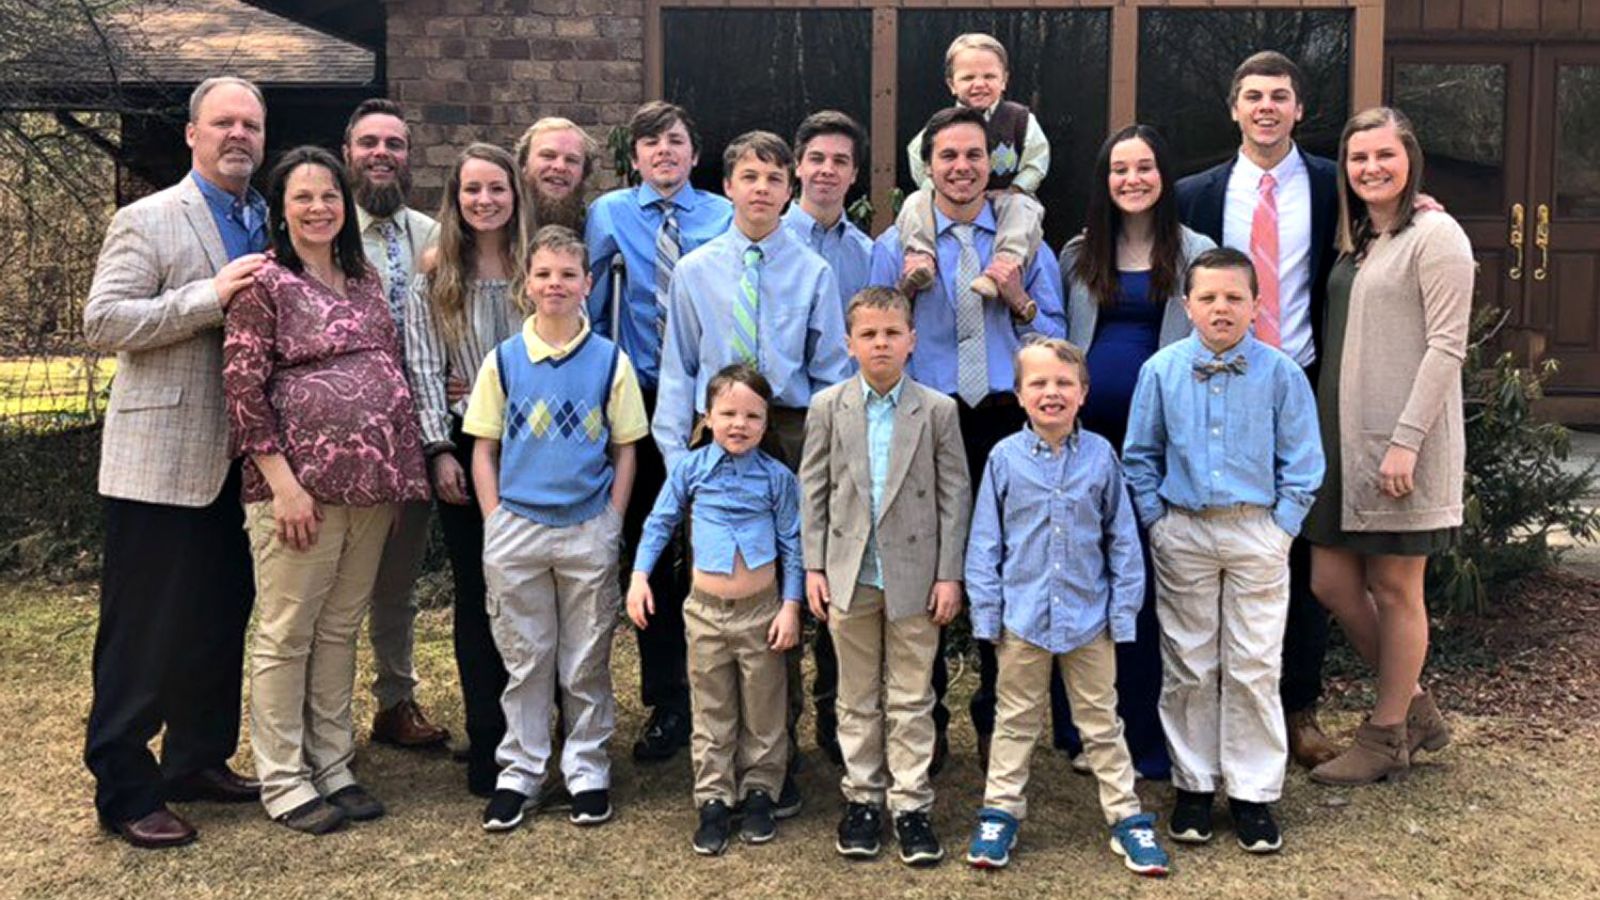 PHOTO: The Schwandt family of Rockford, Michigan is pictured with their 13 sons and added a 14th son this week.